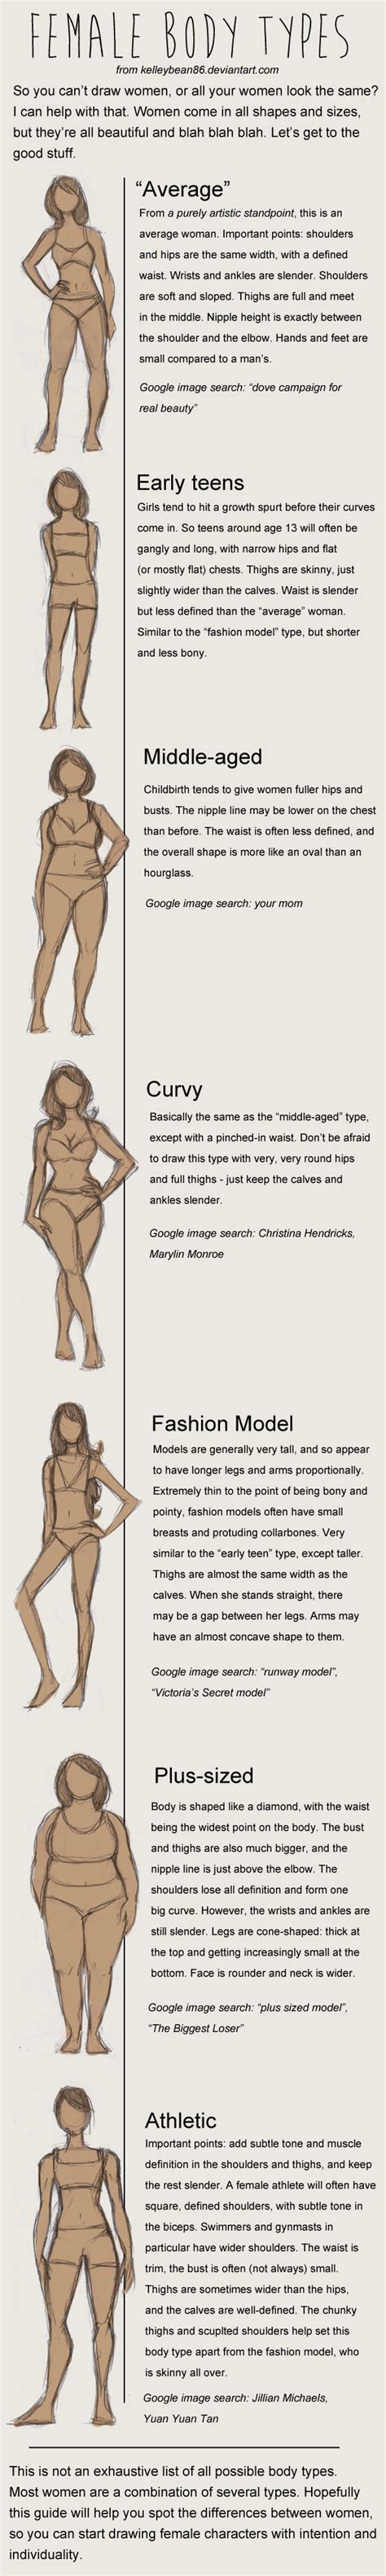 If you know the measurements of your bust, waist and hips you can also use this online calculator which will give you a general idea. Female body types.